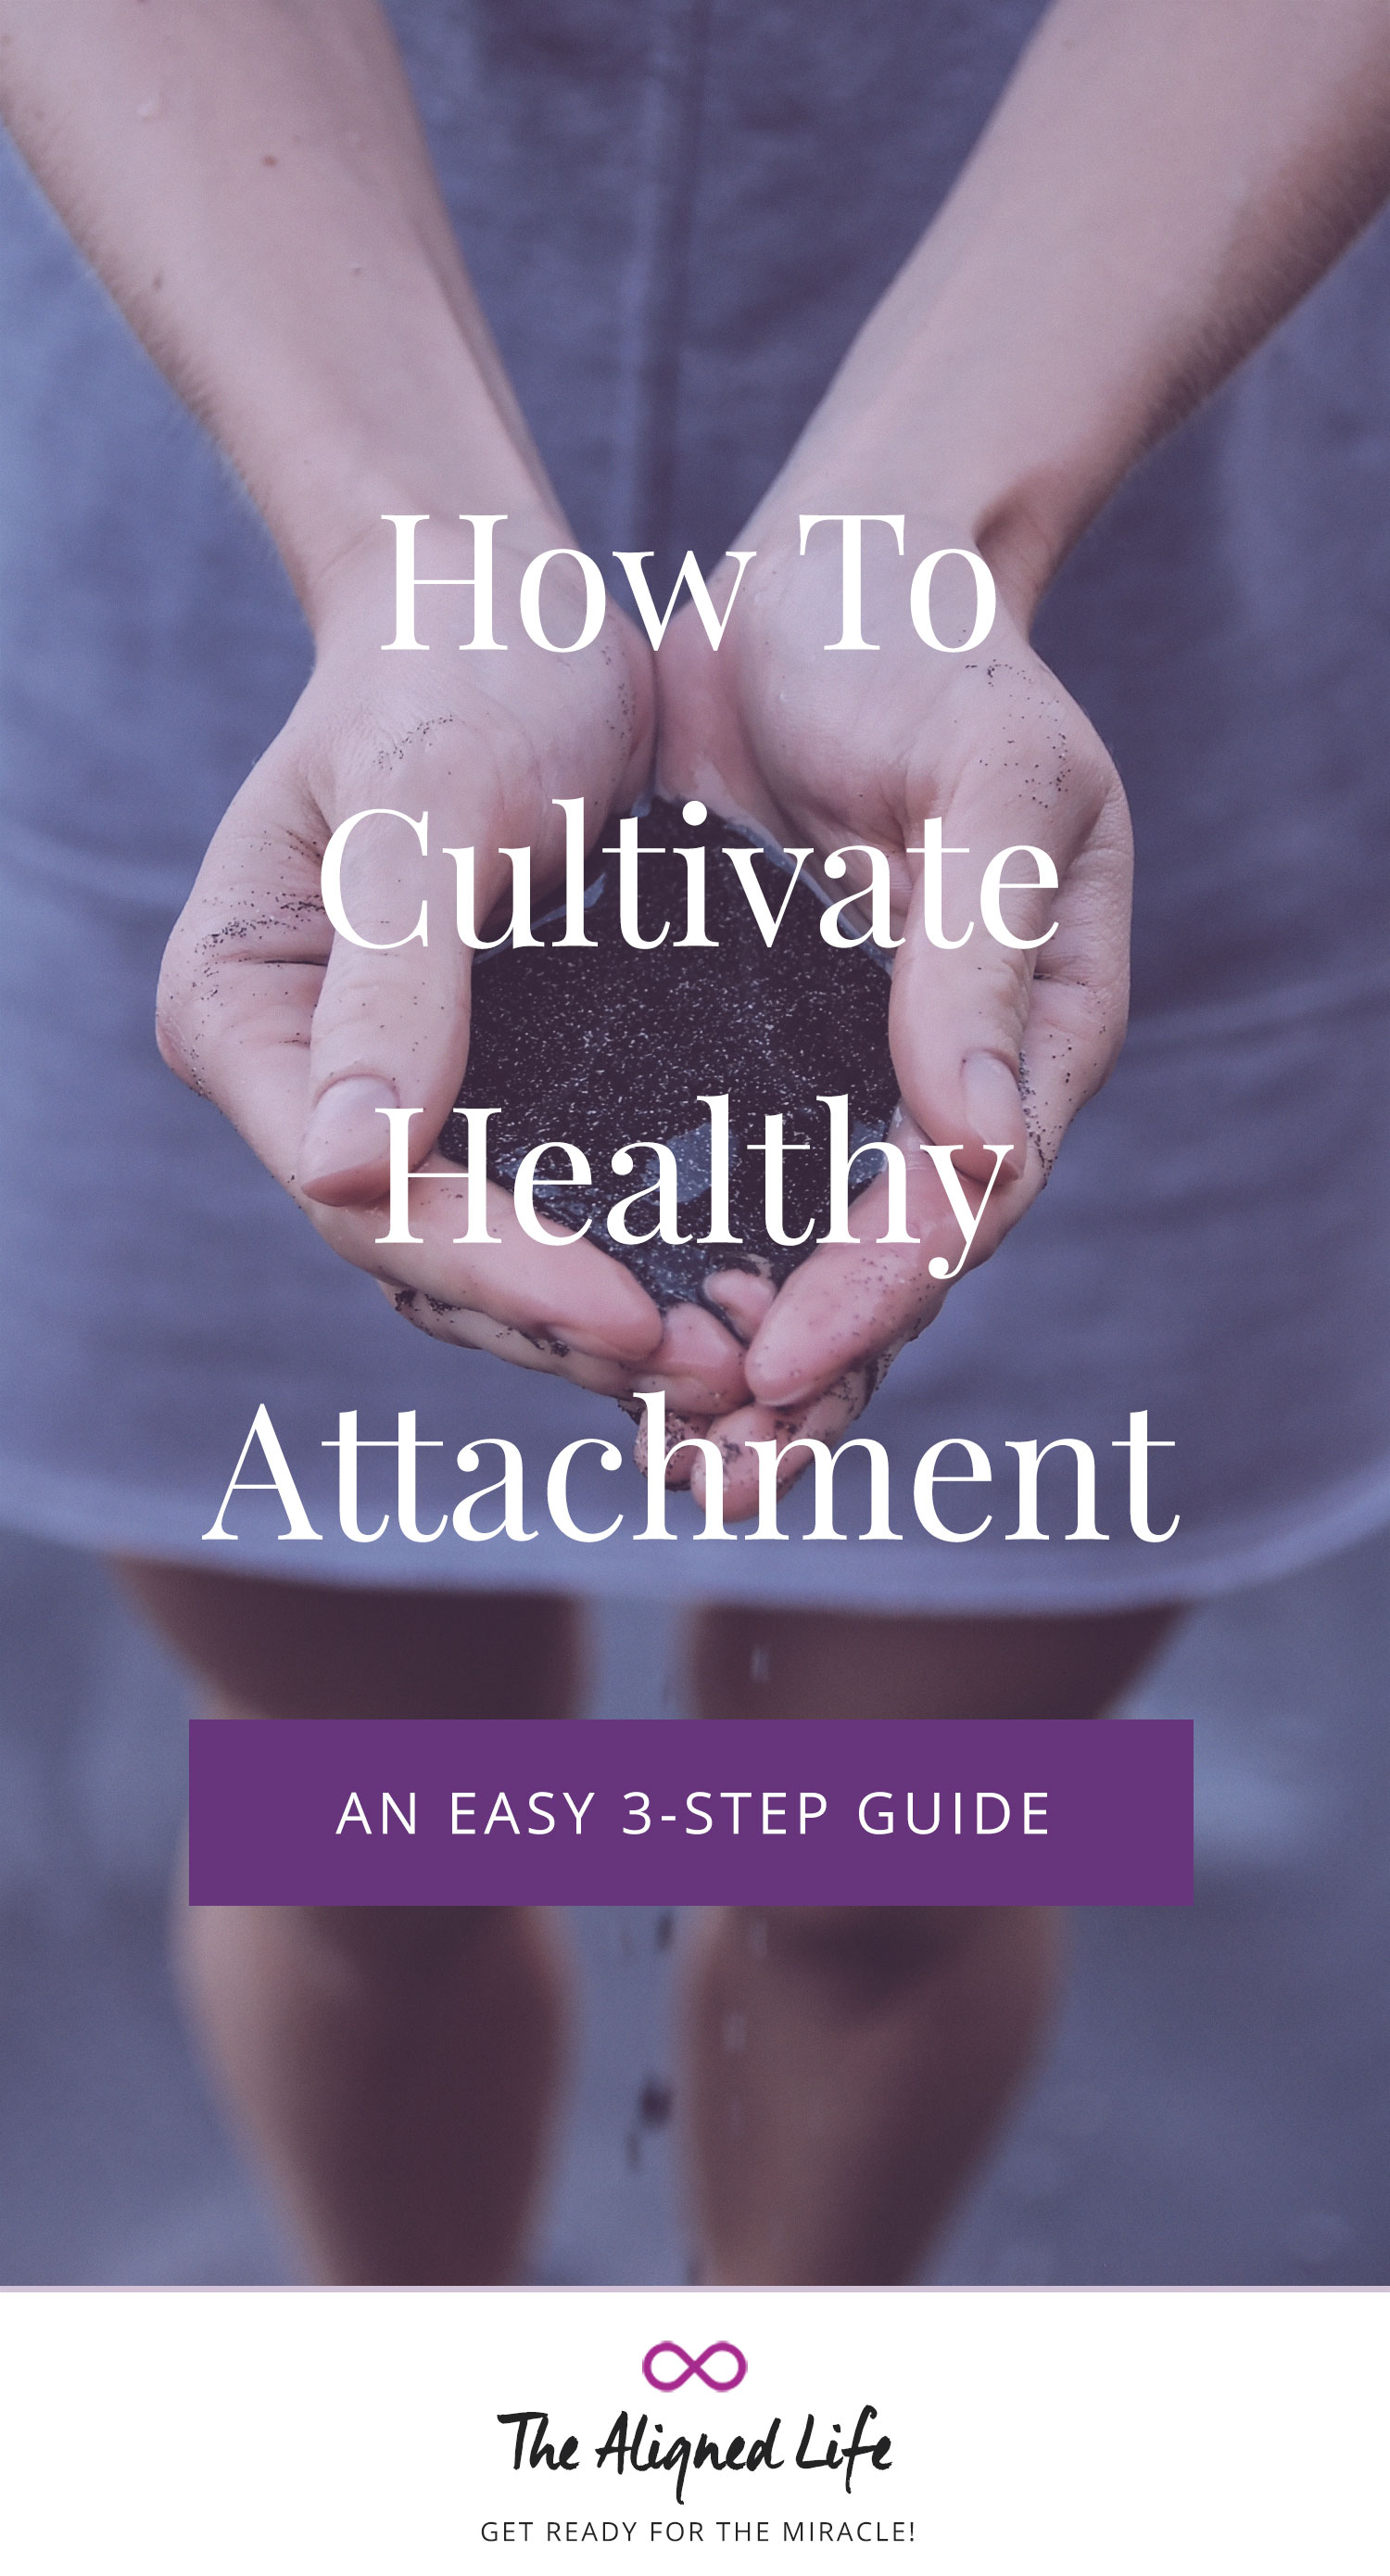 How To Cultivate Healthy Attachment